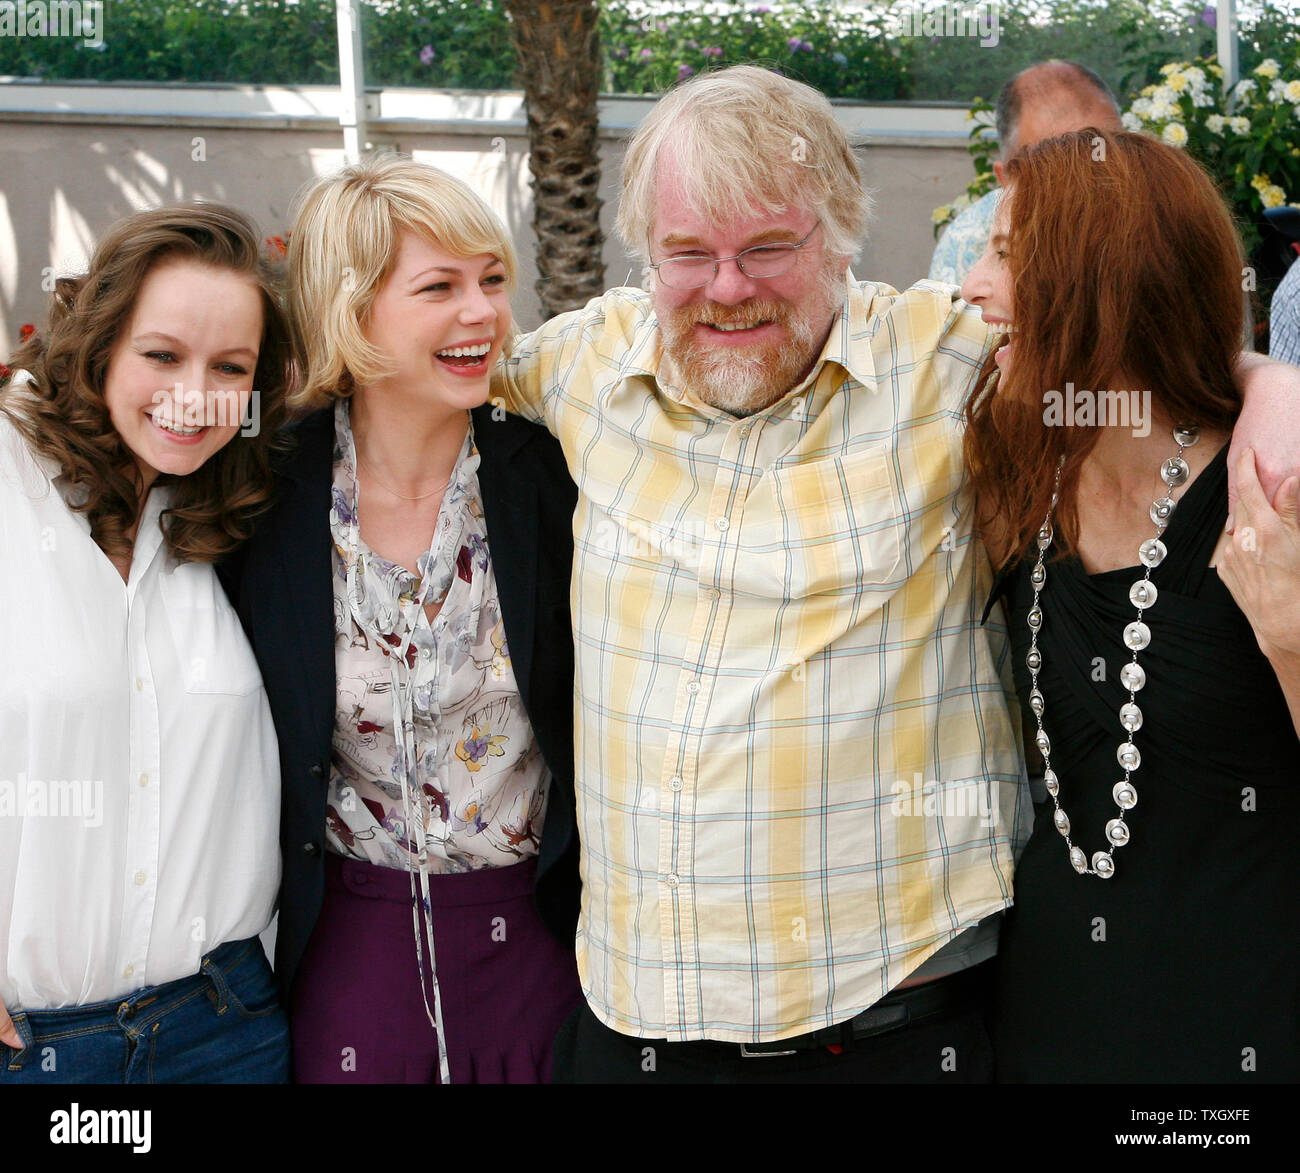 (From L to R) Actresses Samantha Morton, Michelle Williams, actor Philip Seymour Hoffman and actress Catherine Keener arrive at a photocall for the film 'Synecdoche, New York' during the 61st Annual Cannes Film Festival in Cannes, France on May 23, 2008.   (UPI Photo/David Silpa) Stock Photo